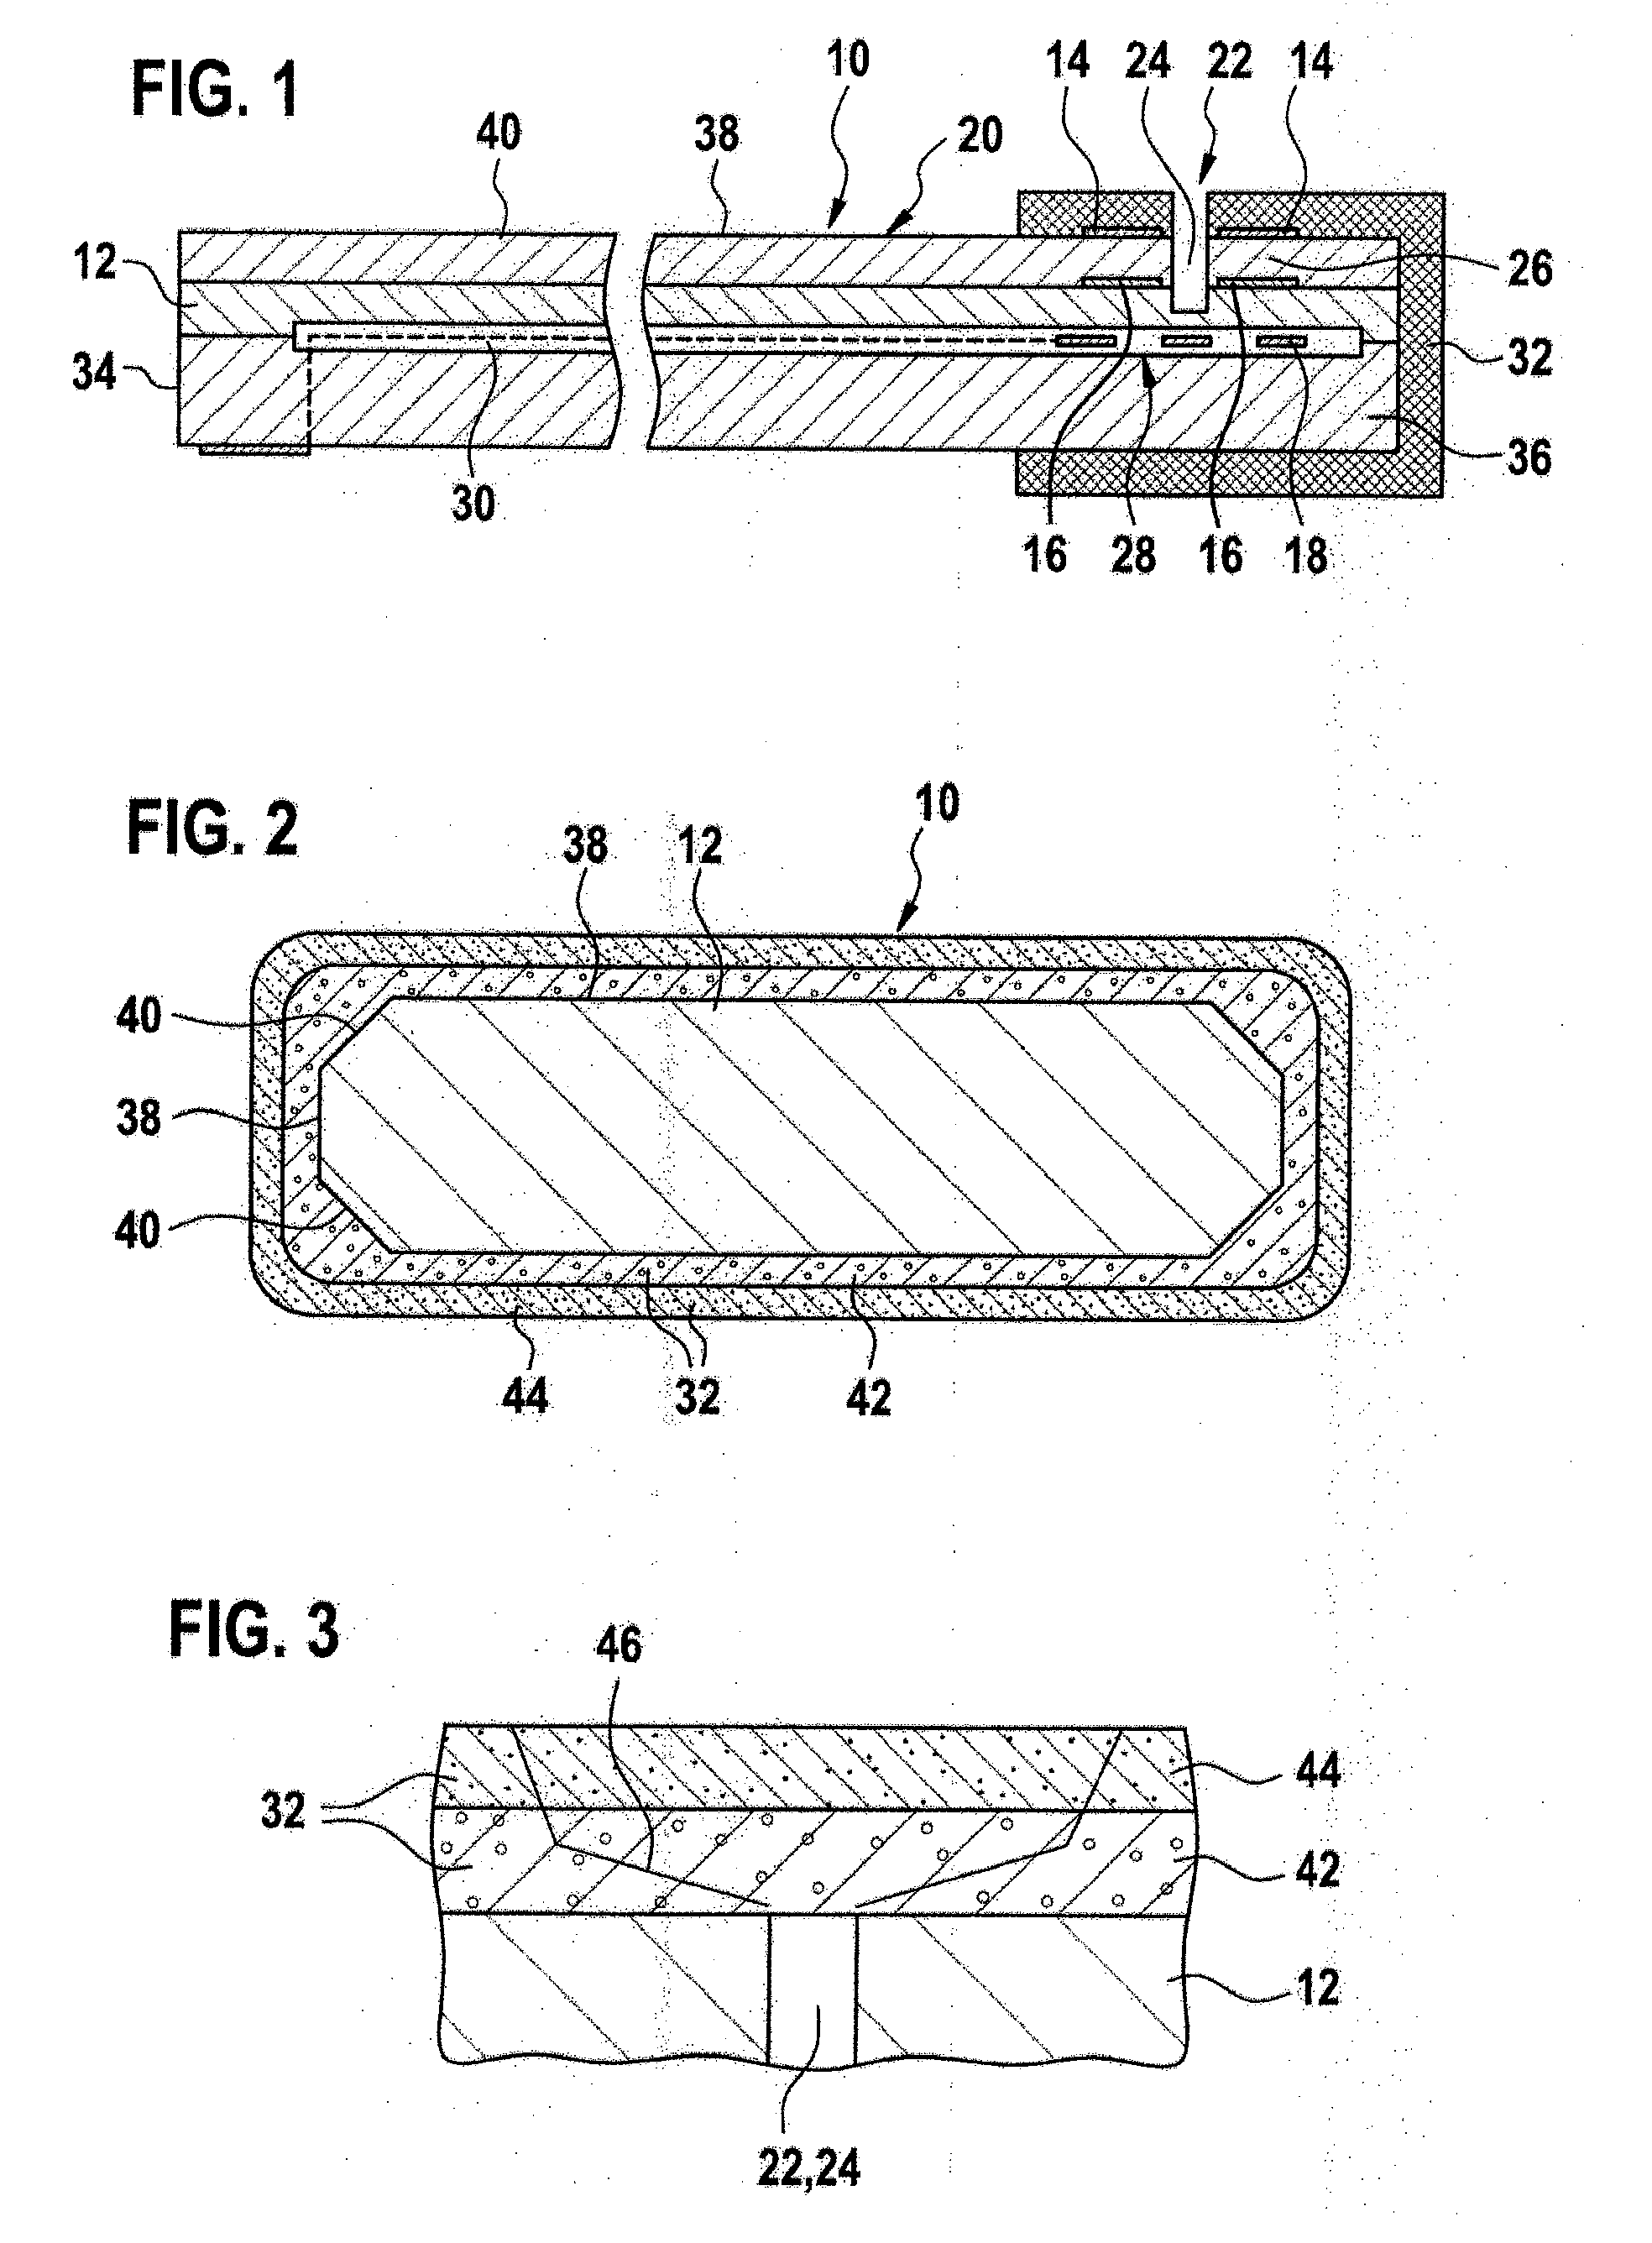 Method for manufacturing a solid electrolyte sensor element for detecting at least one property of a measuring gas in a measuring gas chamber, containing two porous ceramic layers